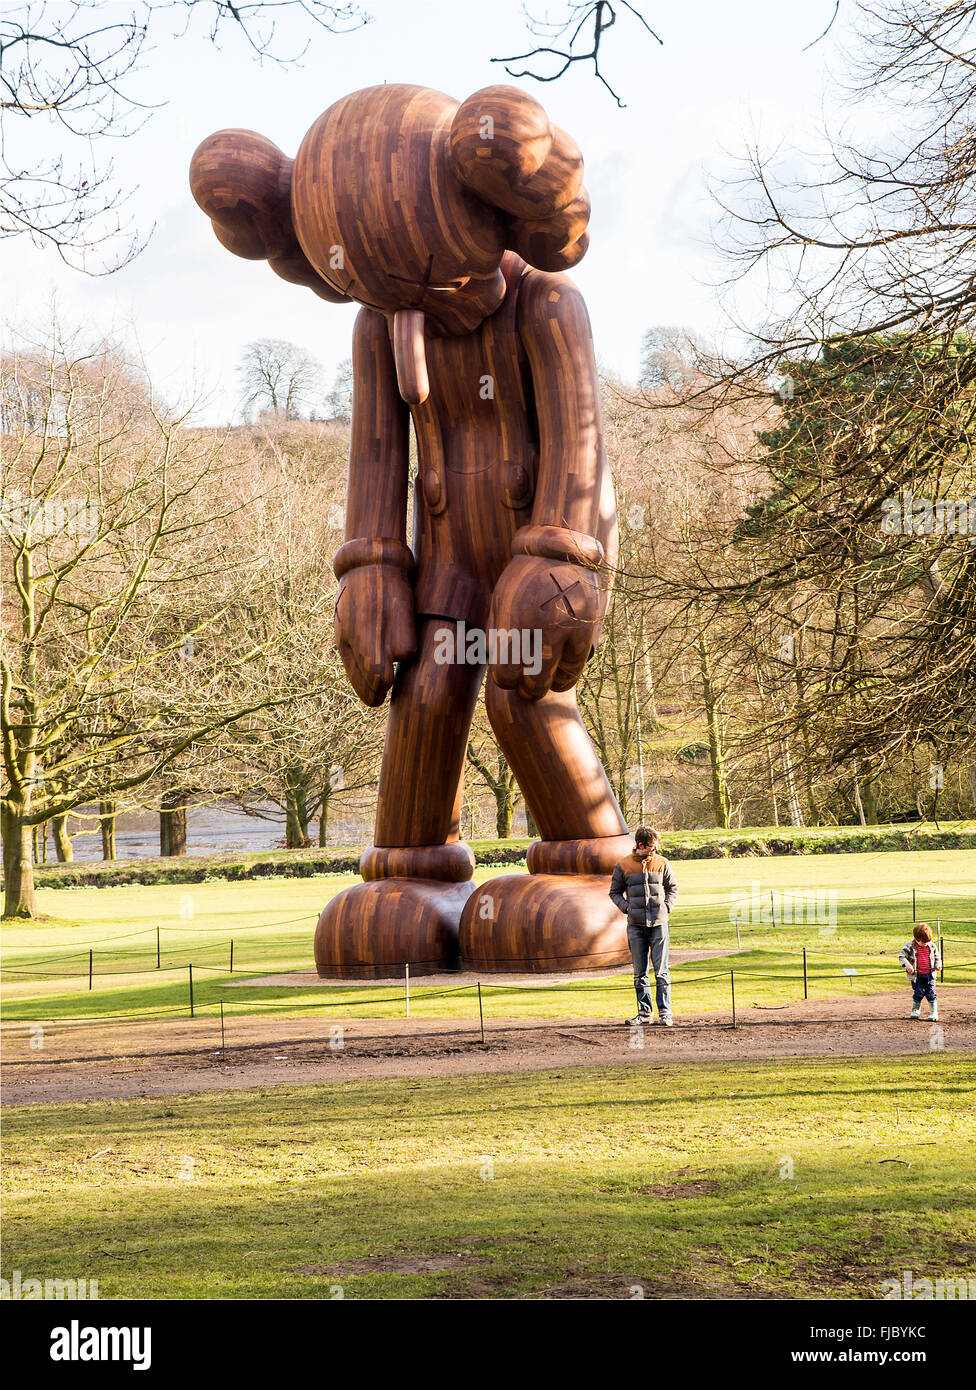 The Wooden Cartoon Sculpture Small Lie Stands Out at the Yorkshire Sculpture Park West Bretton Yorkshire England United Kingdom Stock Photo